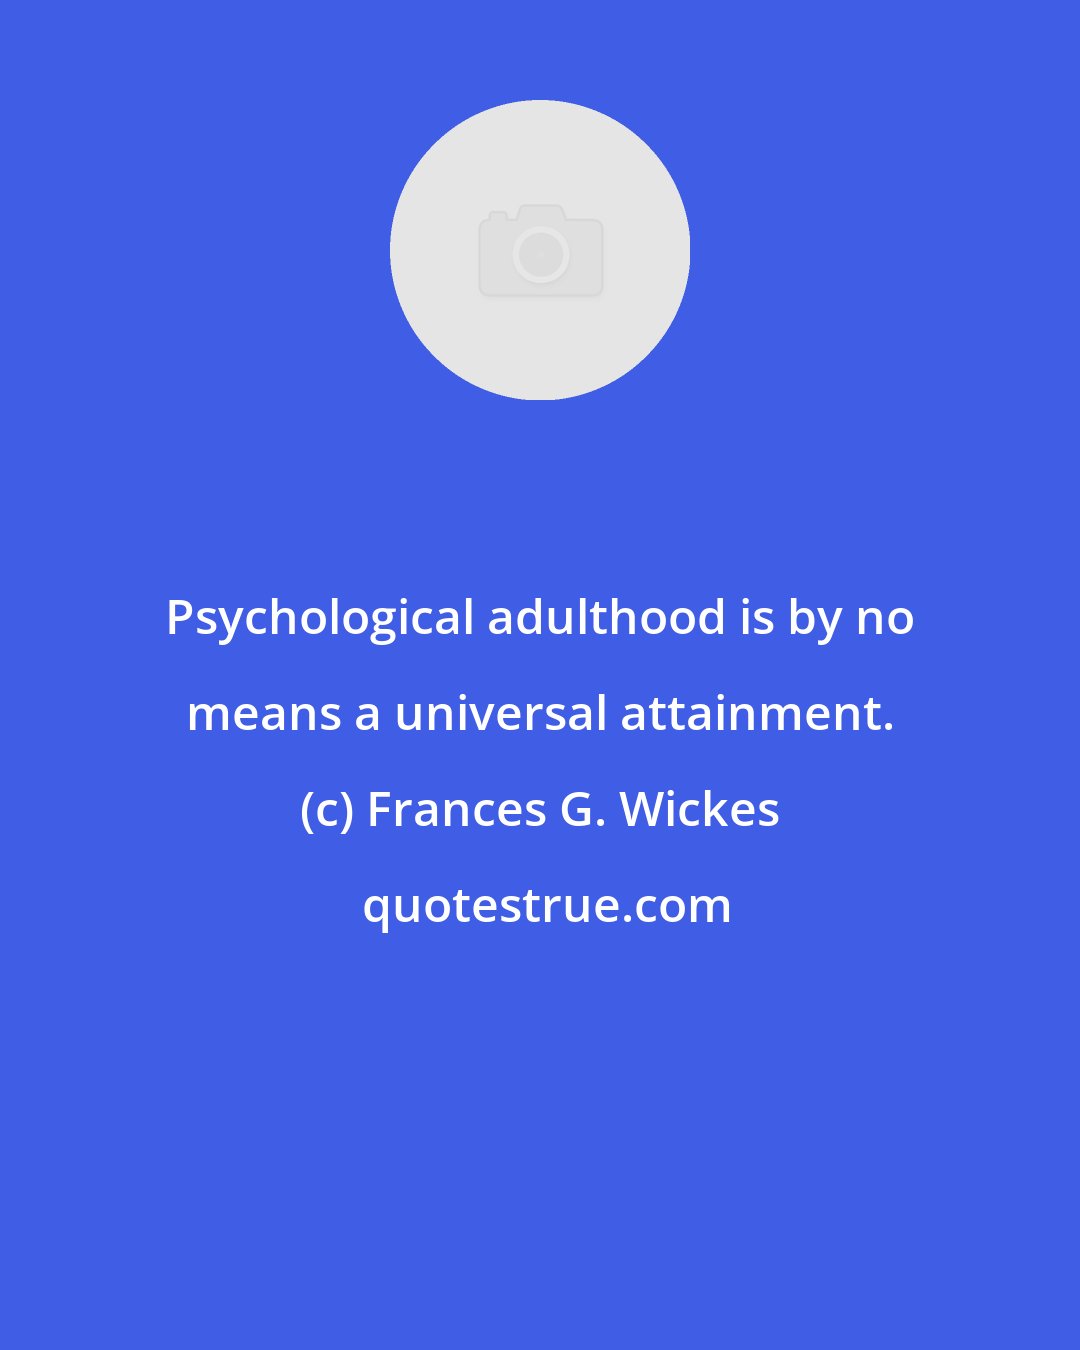 Frances G. Wickes: Psychological adulthood is by no means a universal attainment.